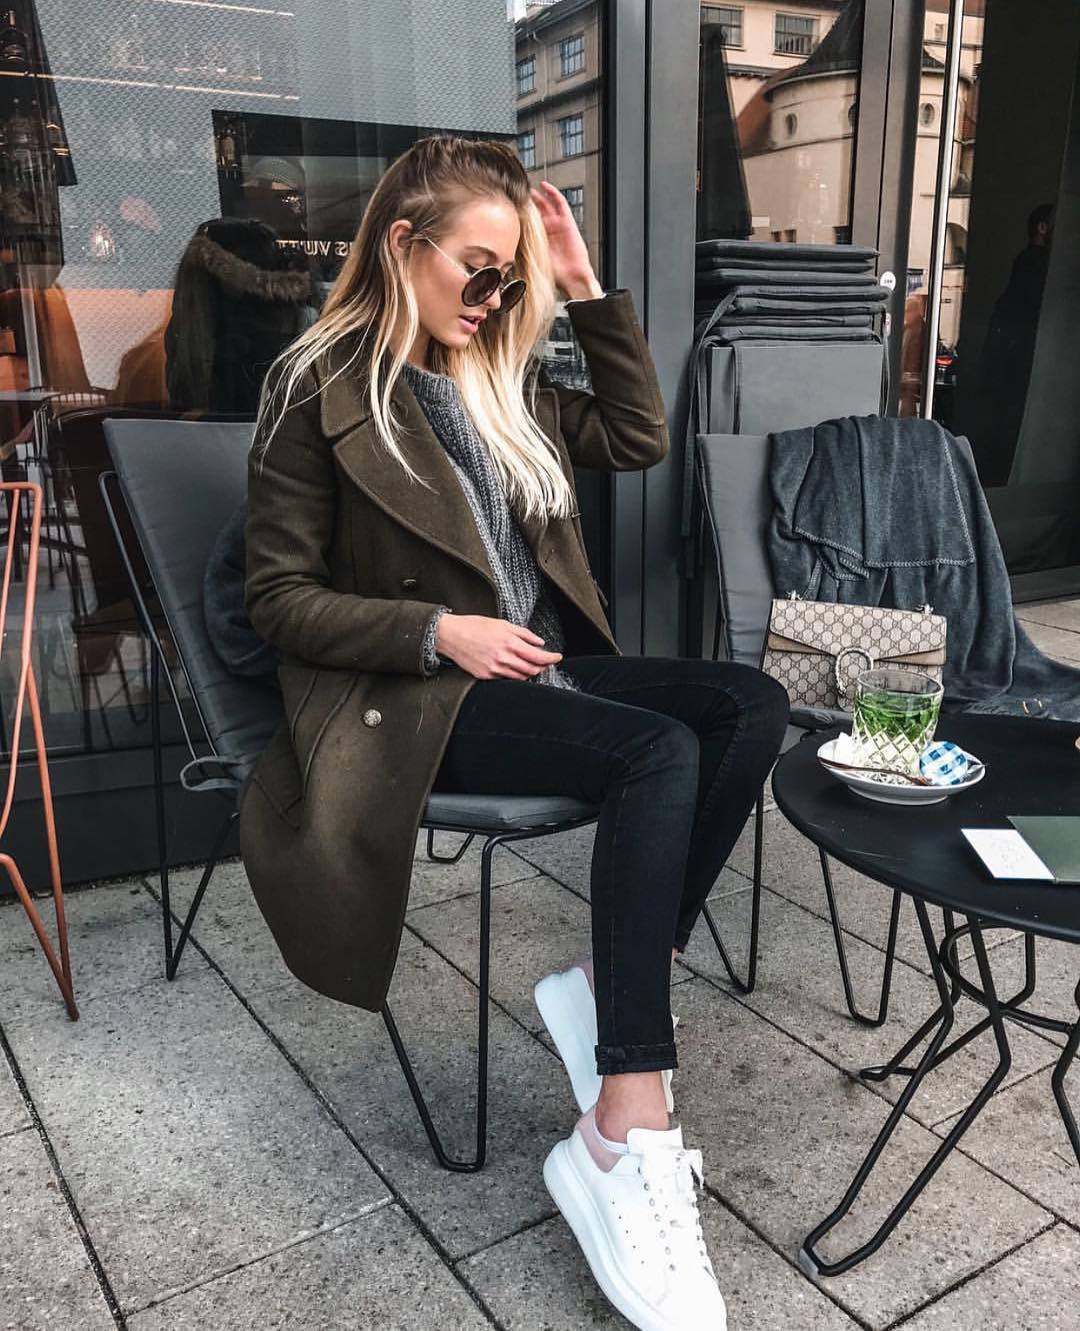 Dark Green Wool Coat With Grey Sweater,
Black Skinnies And White Sneakers For Fall